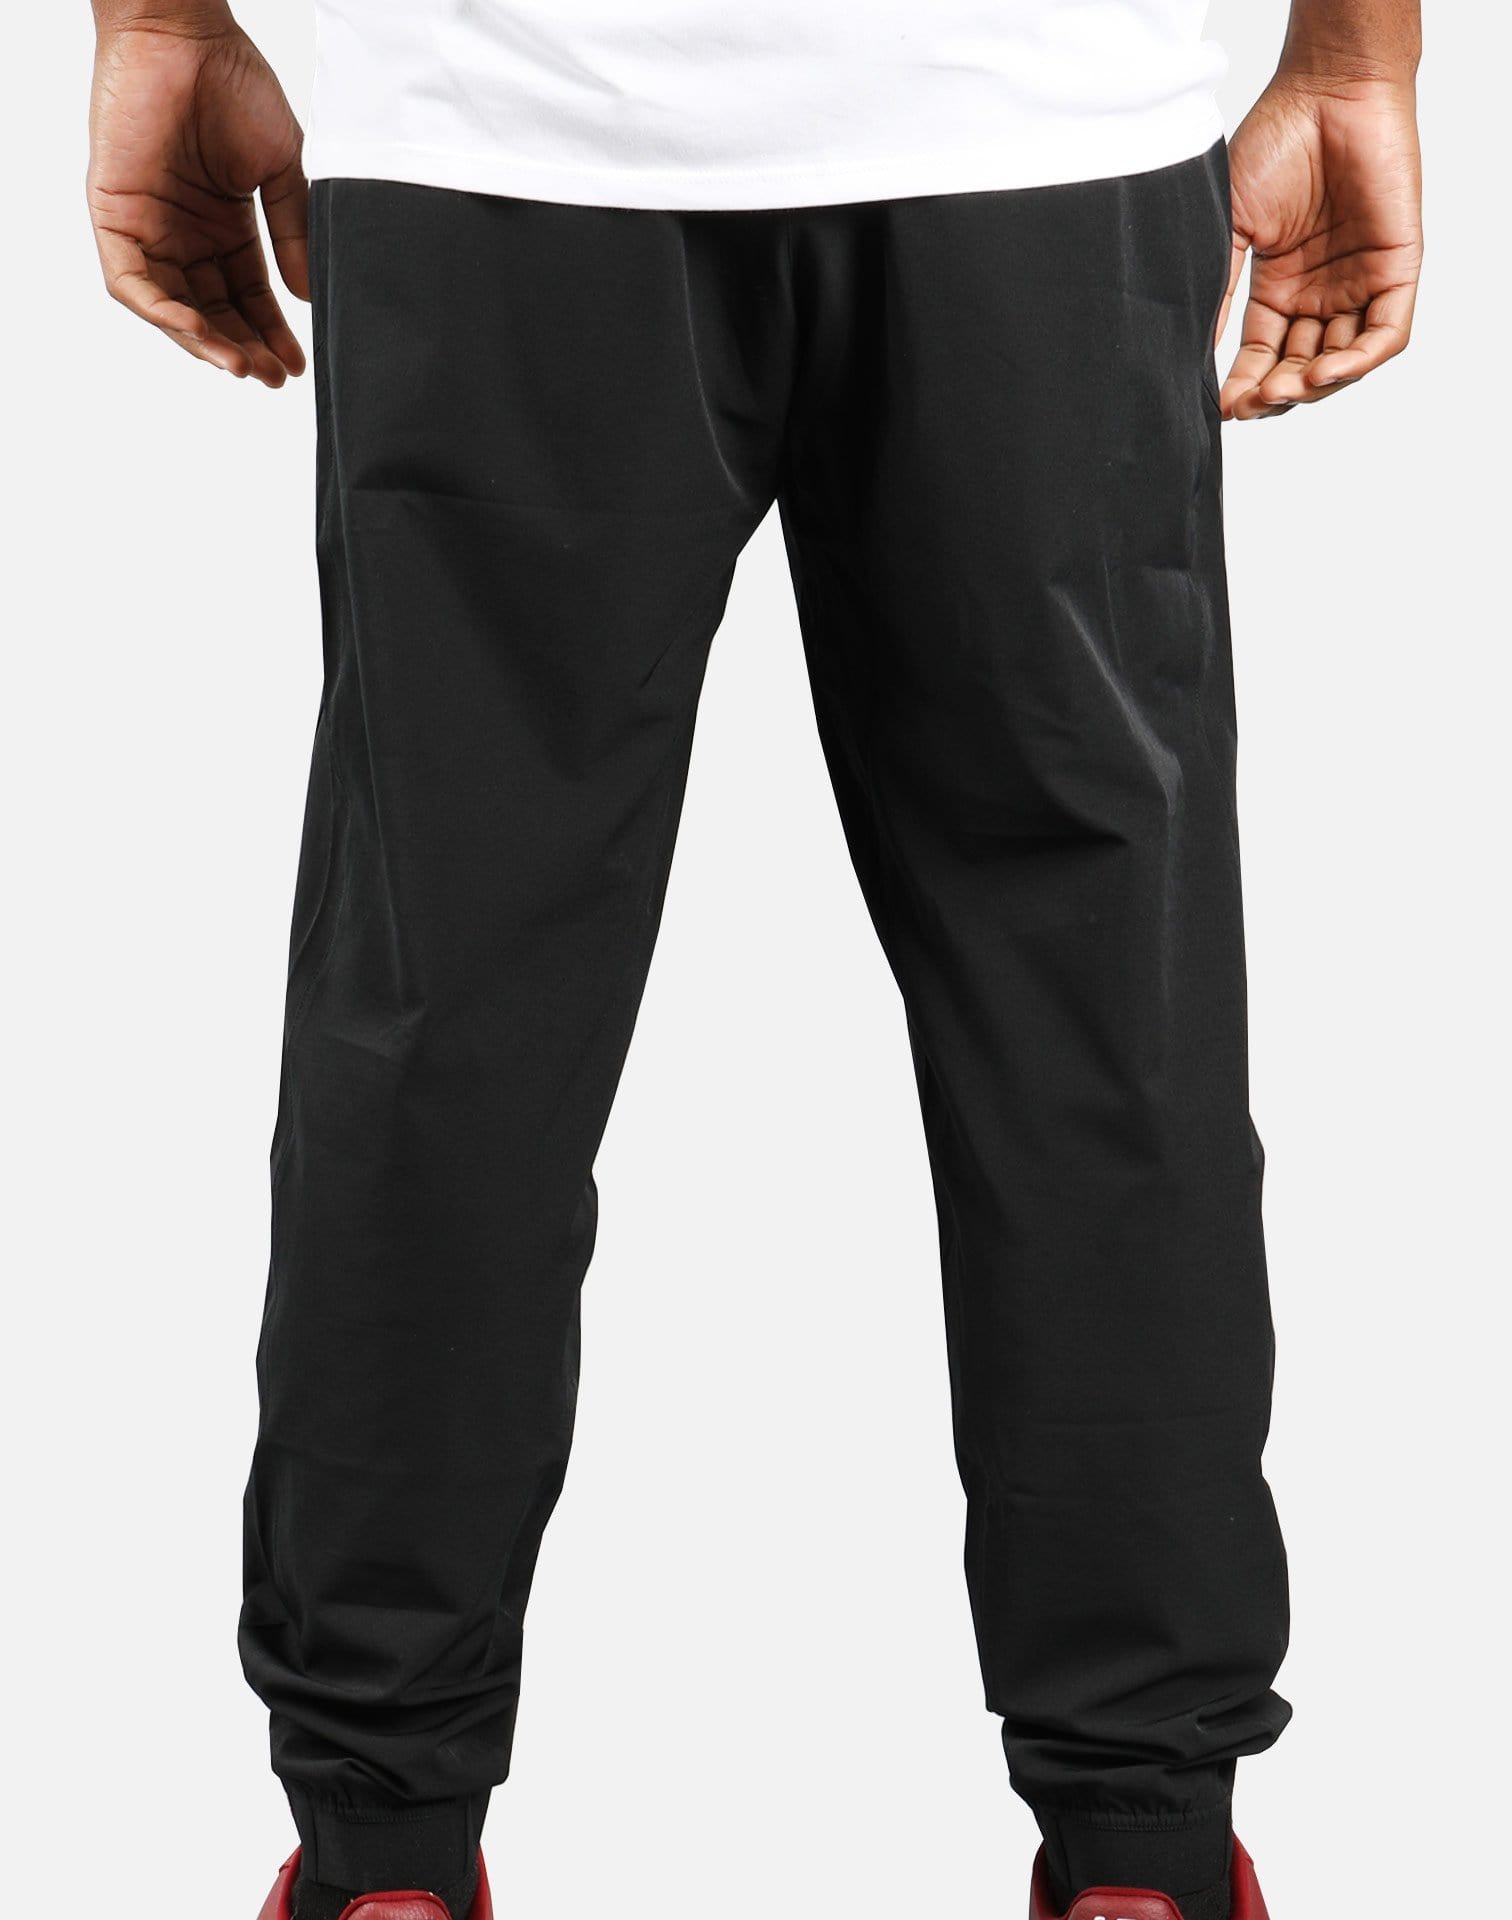 Buy NBA CHICAGO BULLS DRI-FIT SHOWTIME PANTS for EUR 69.90 on